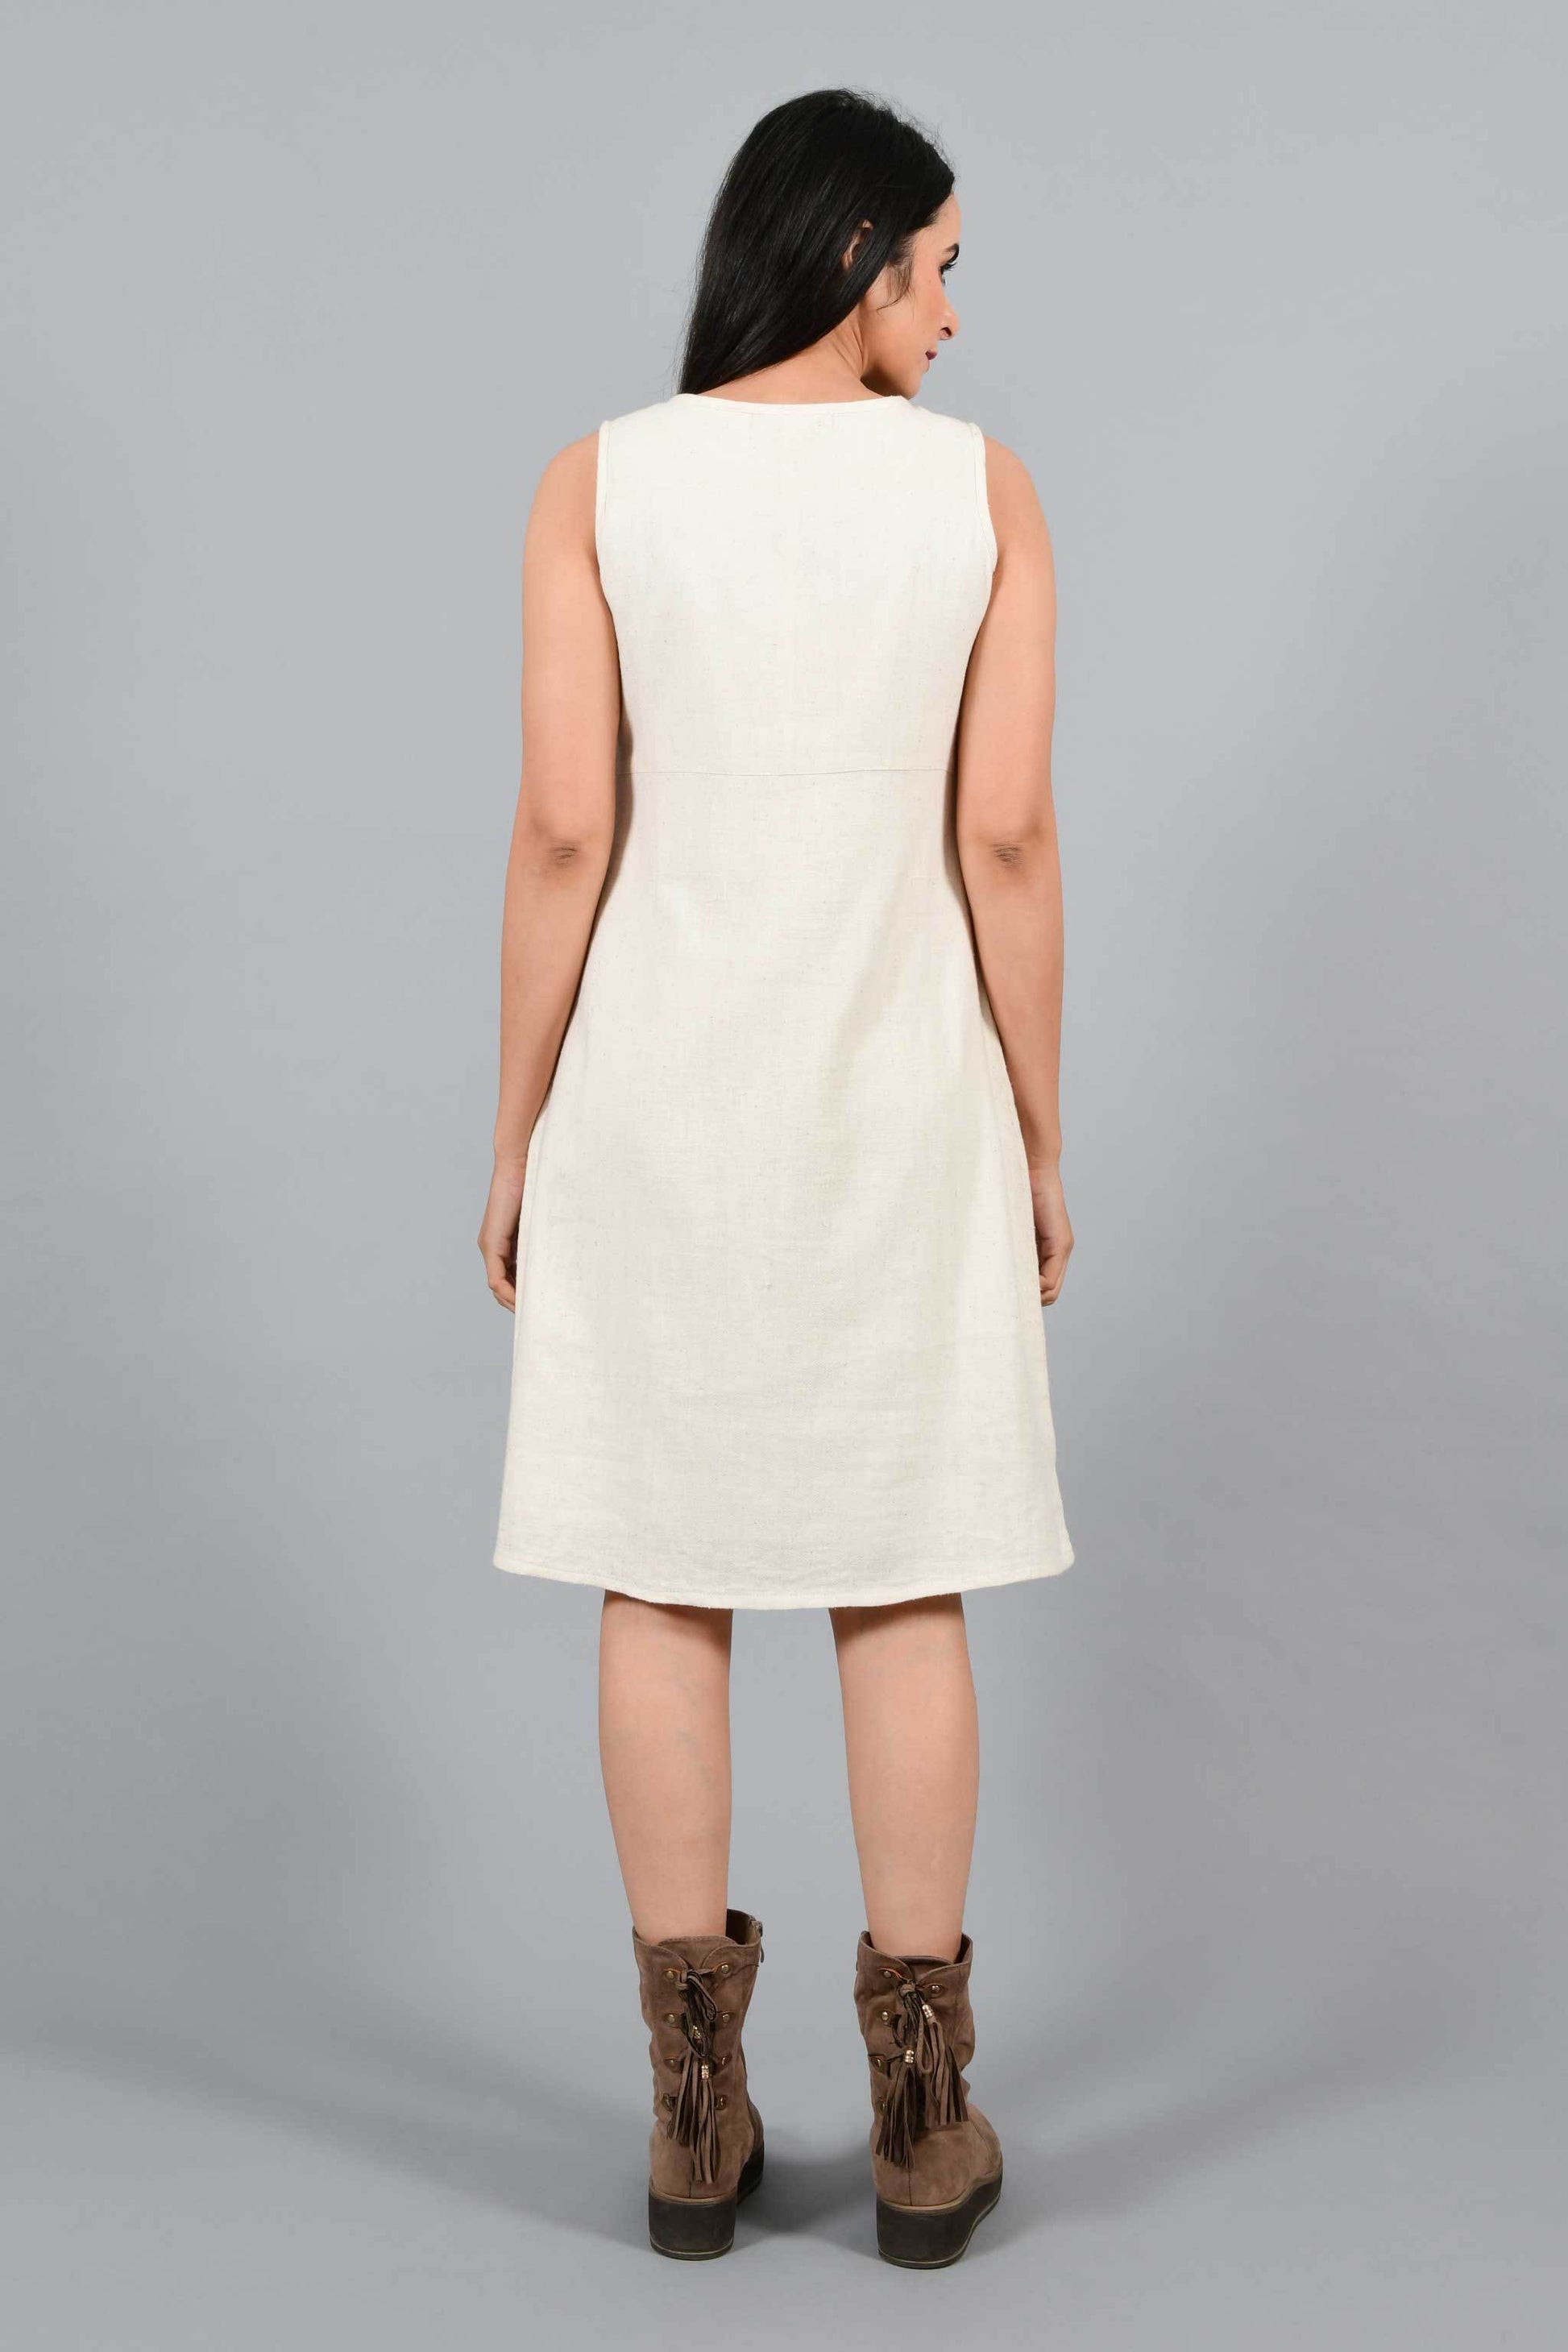 Back pose of an Indian female womenswear fashion model in an off-white Cashmere Cotton Pleated Dress made using handspun and handwoven khadi cotton by Cotton Rack.